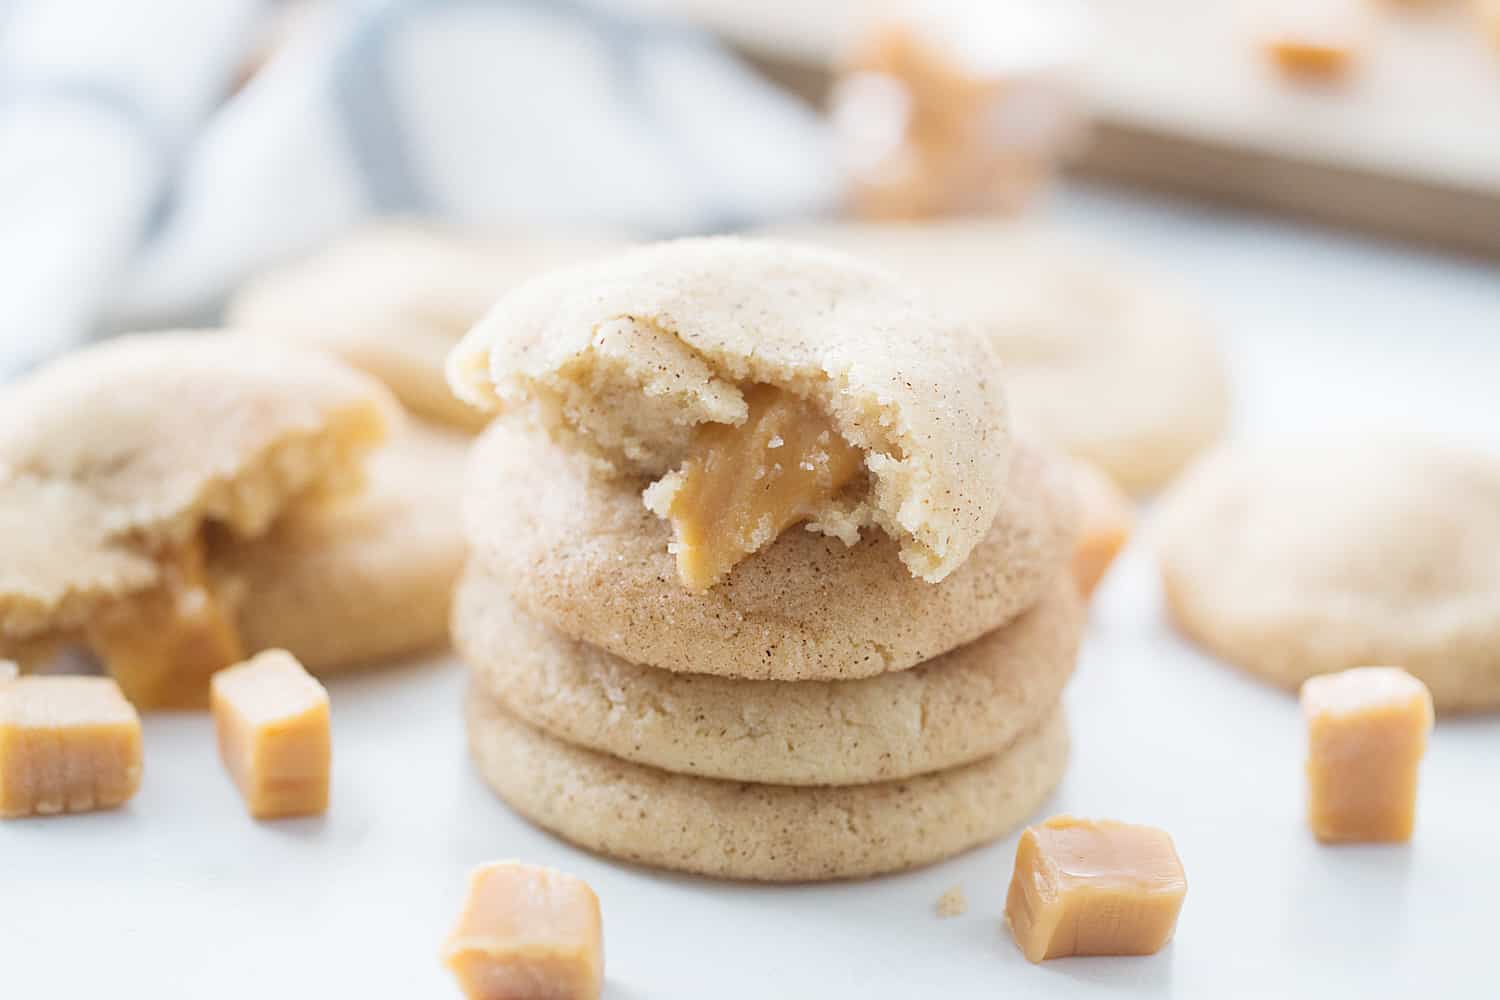 Caramel Snickerdoodles - Caramel snickerdoodles may change the way you bake snickerdoodles forever. These cinnamon sugar cookies are soft, chewy, and all kinds of gooey. #cookies #snickerdoodles #baking #halfscratched #caramel #cookierecipe #dessert #sweet